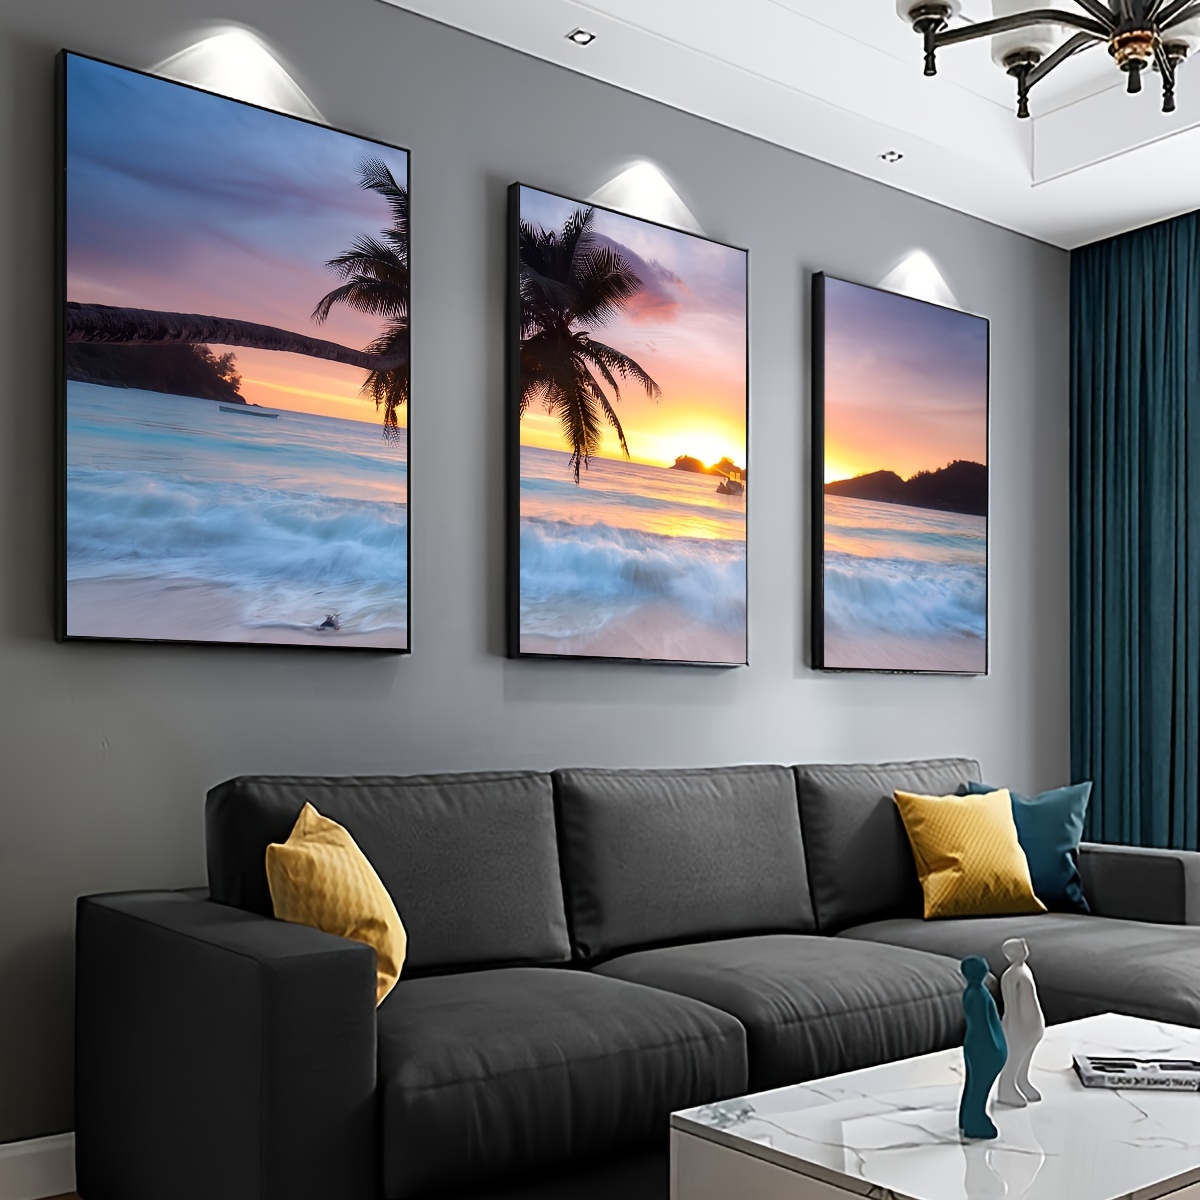 How to Choose Large Wall Art for Living Room?, by nordicwallcanvas